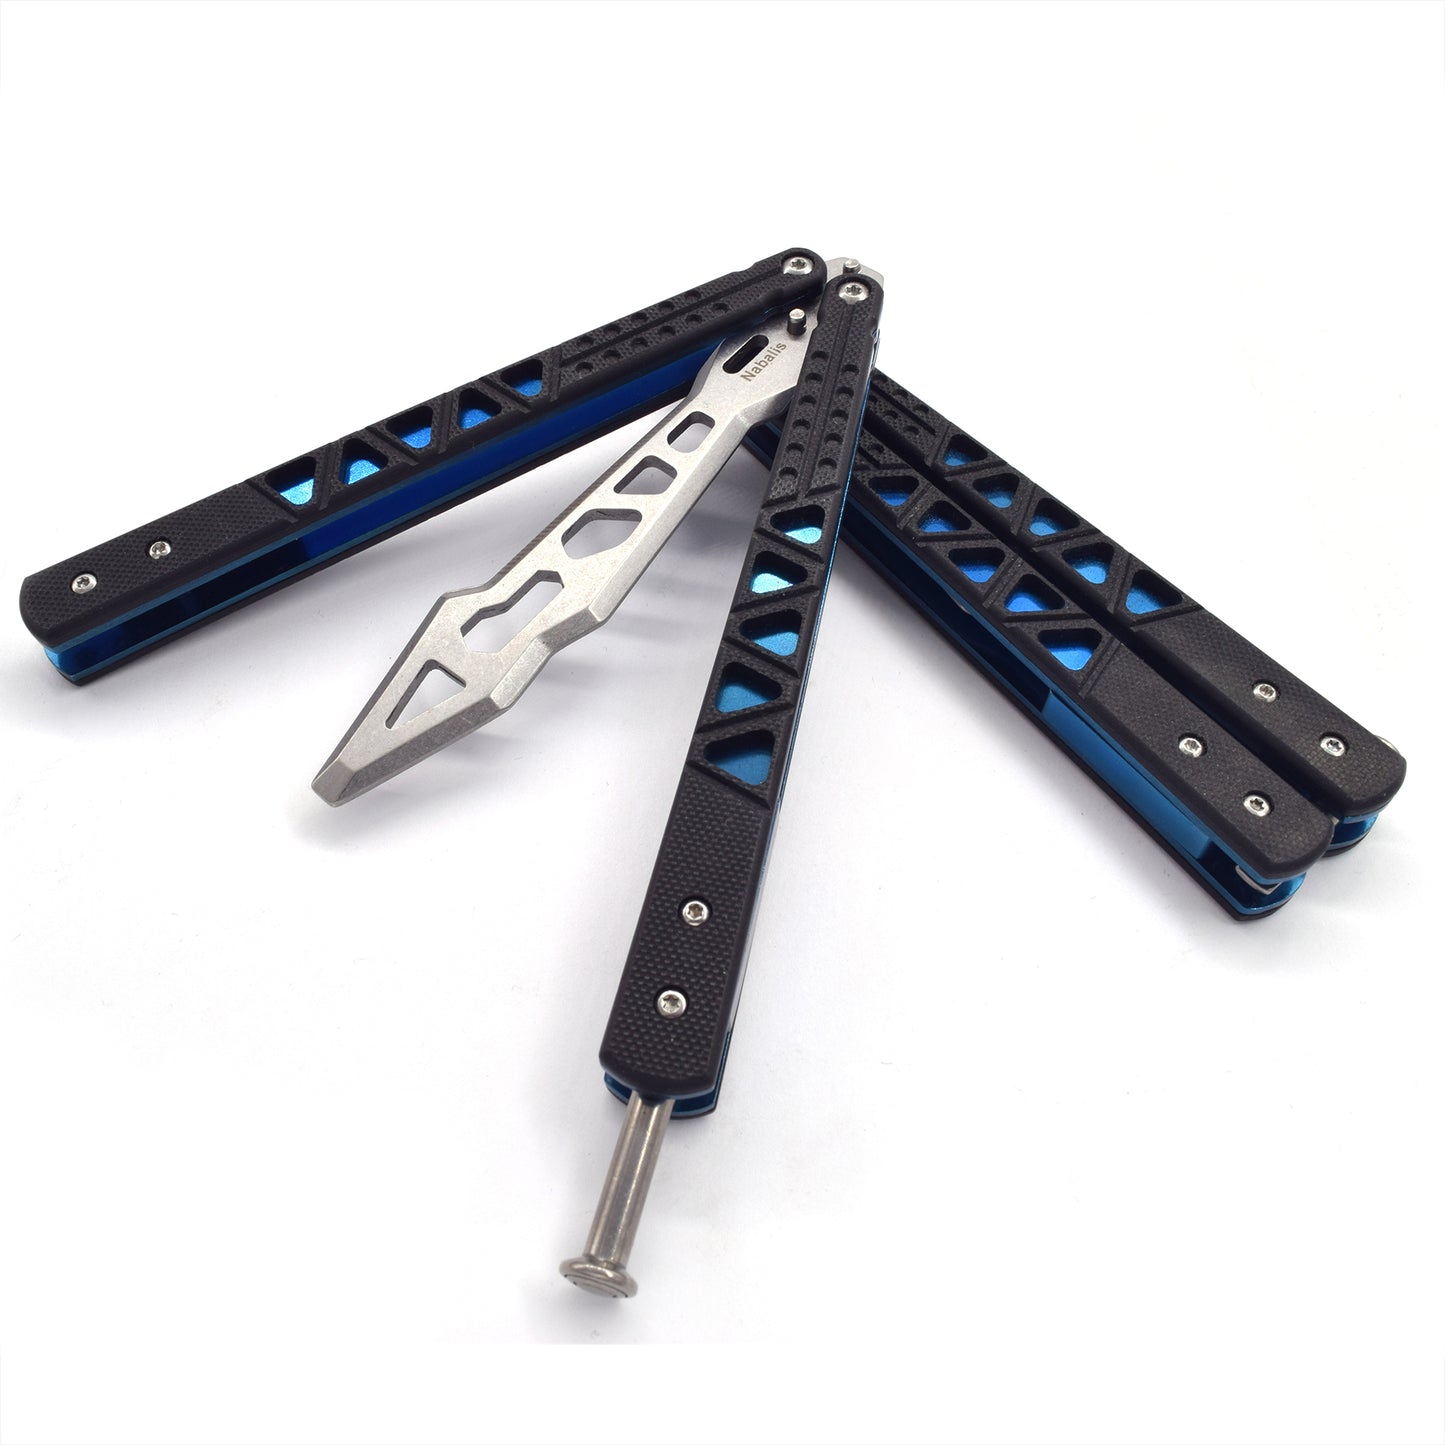 Nabalis G10 Balisong Butterfly Knife Trainer-Lightweight-black-open and closed